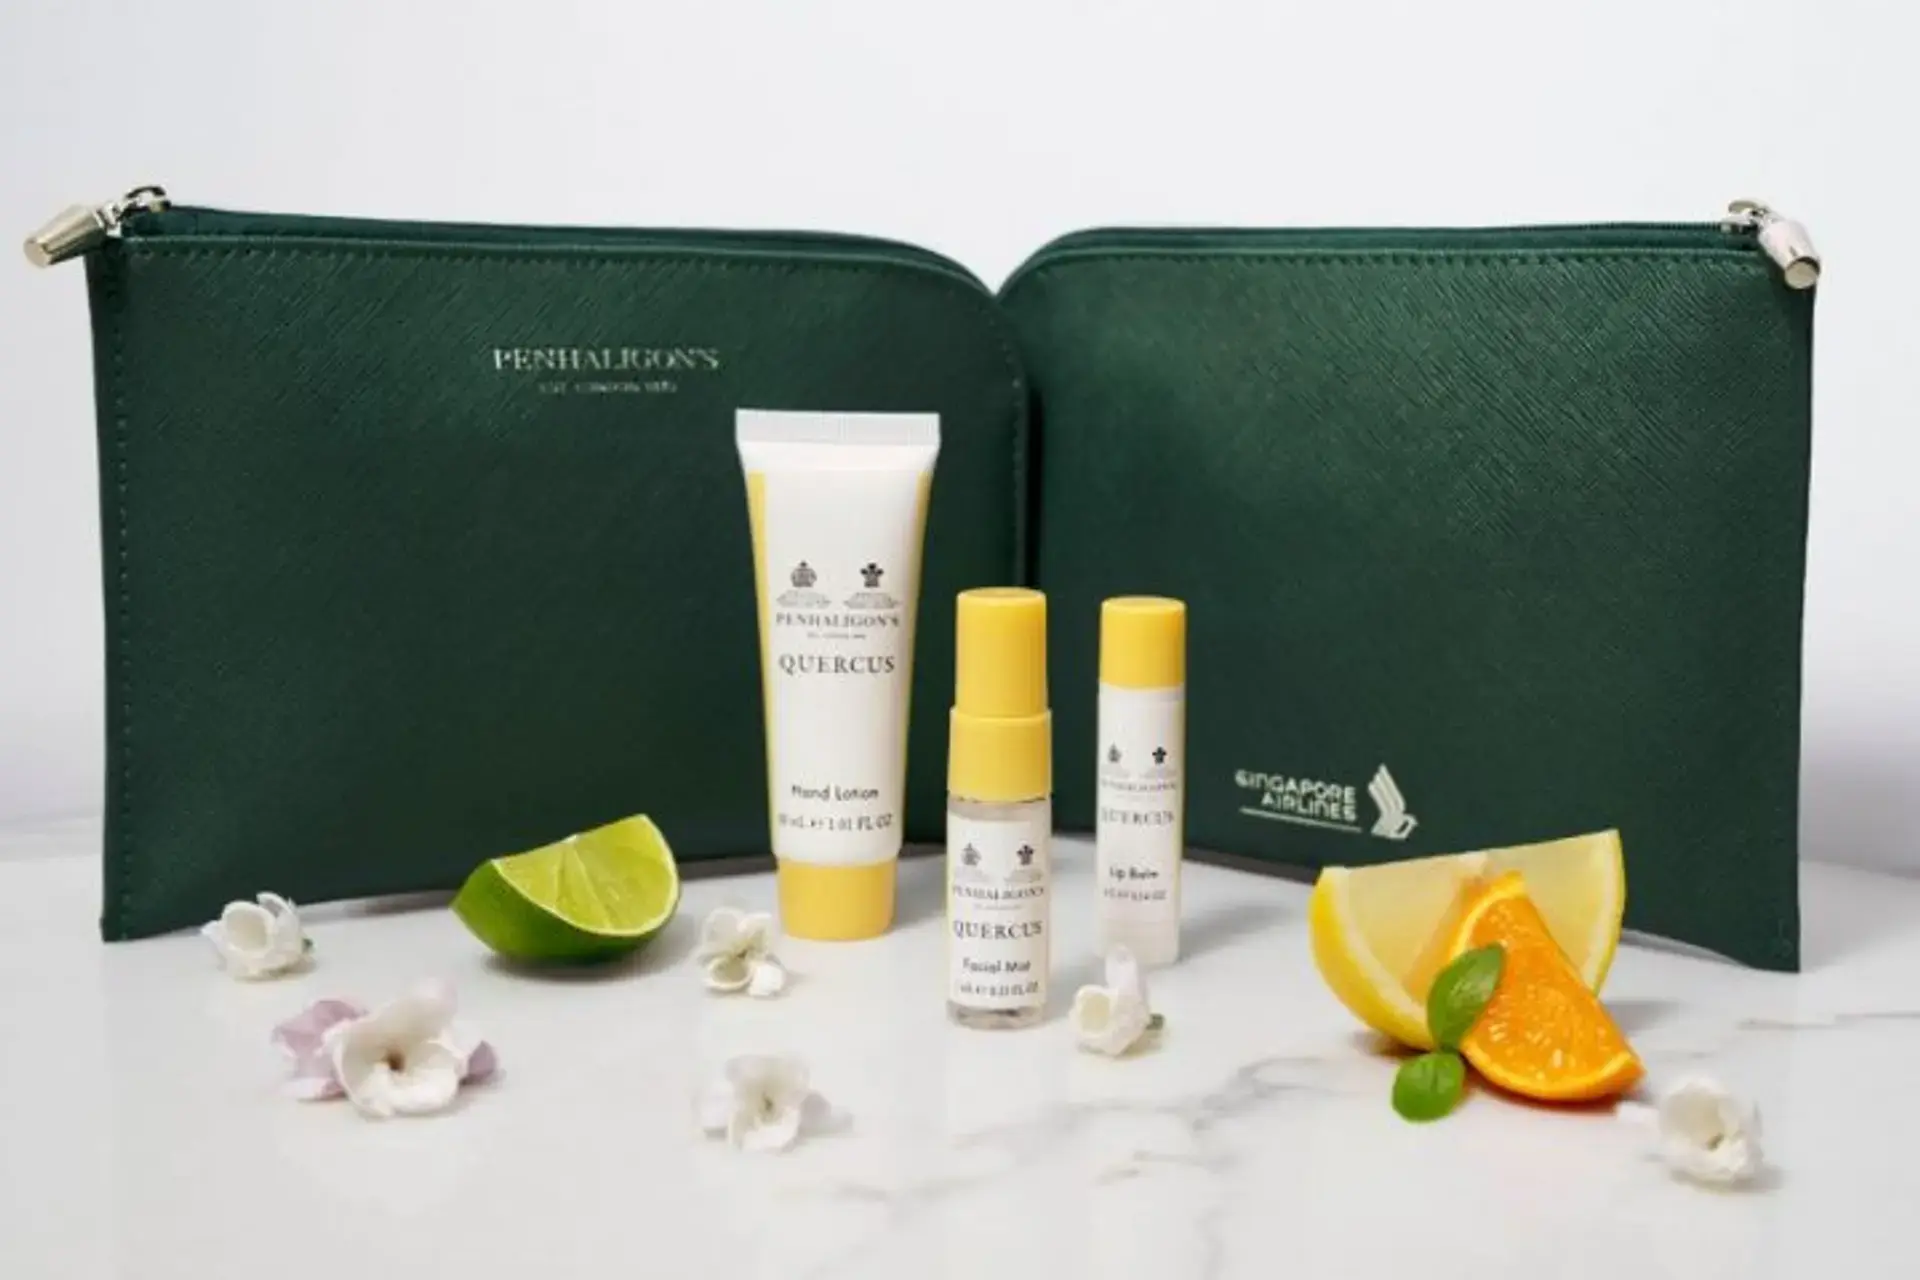 Singapore Airlines Business Class Amenity Kit 2023